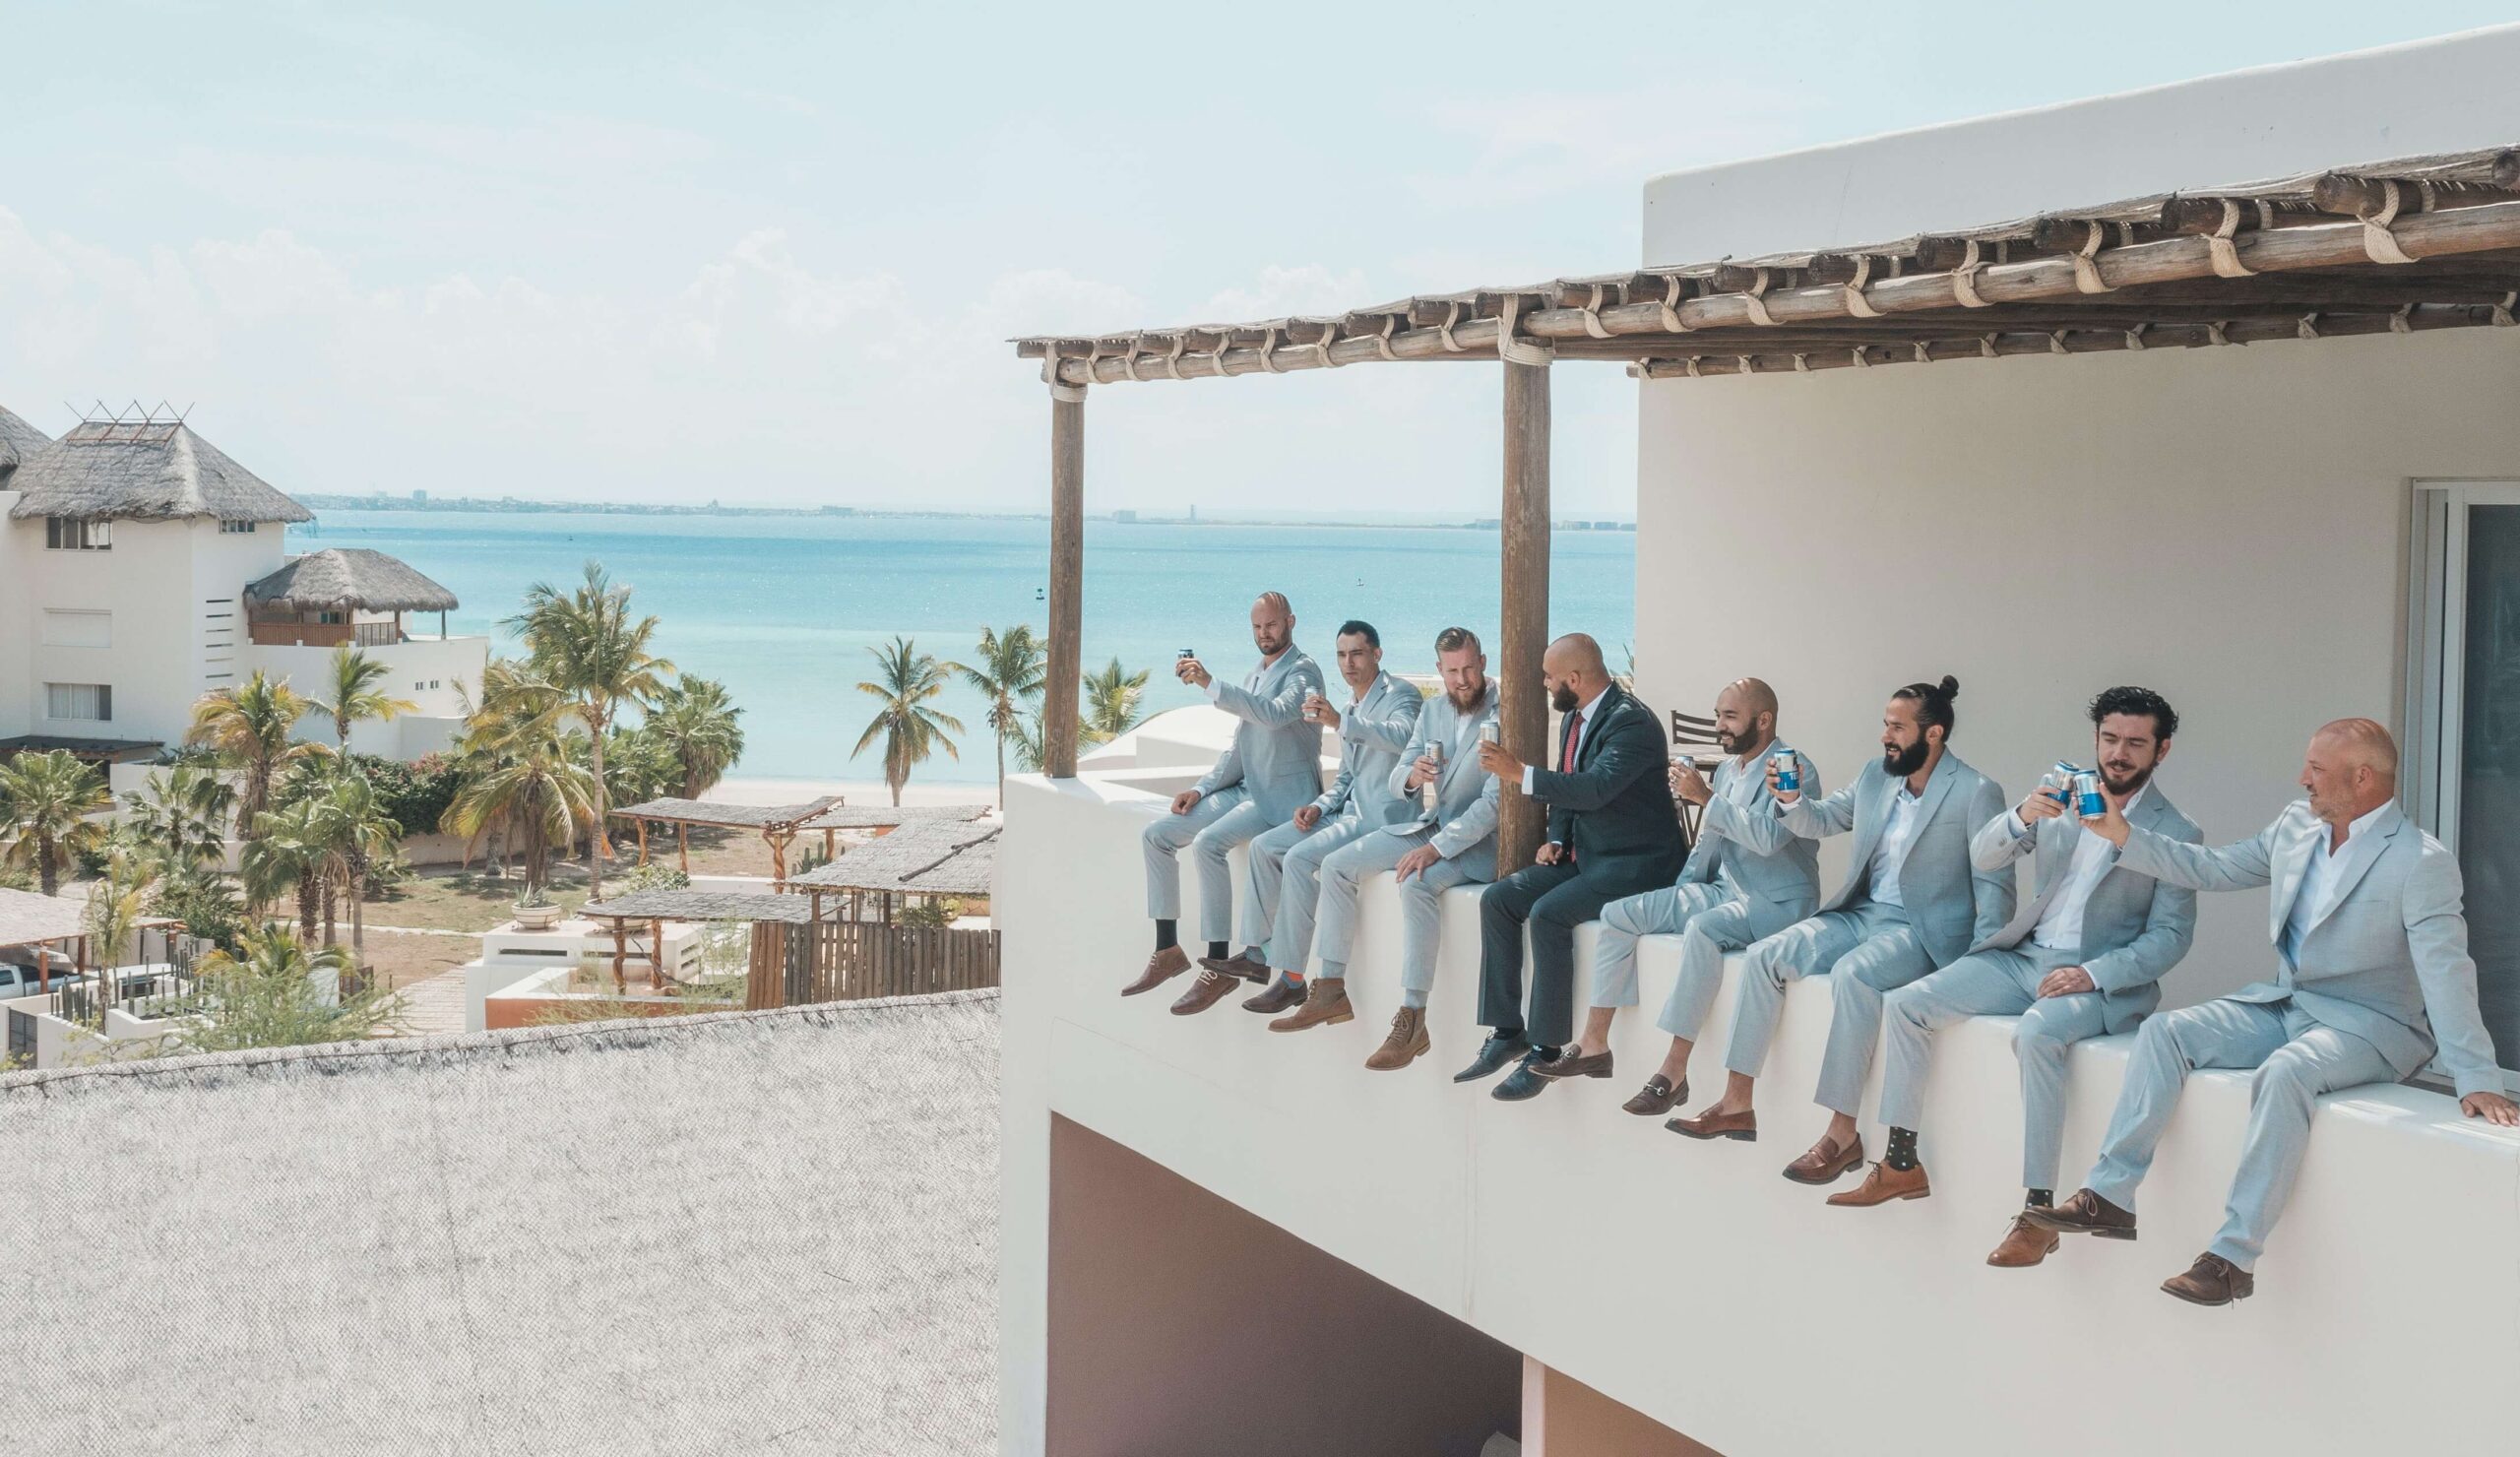 groomsmen gift ideas not alcohol related